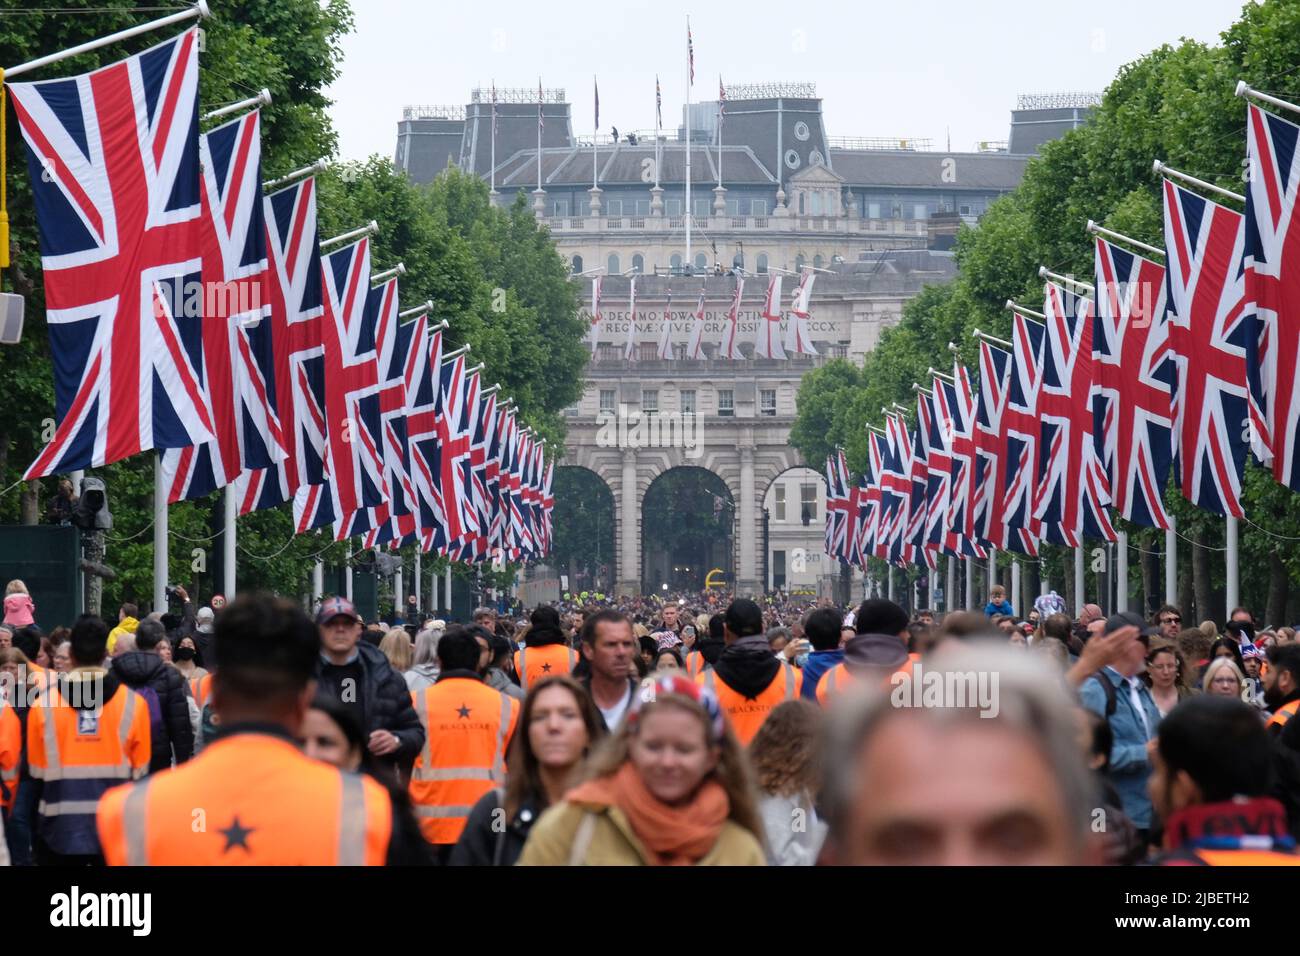 London, UK, 5th June, 2022. On the fourth and final day of the Queen's Platinum Jubilee, celebrations concluded with a 3 kilometre-long pageant, which featuring seven thousand people parading along Whitehall, the Mall and Birdcage Walk. Members of the public continued to pull out all the stops, dressing in Union Jack colours, in what many described as a 'once-in-a-lifetime event'. Credit: Eleventh Hour Photography/Alamy Live News Stock Photo